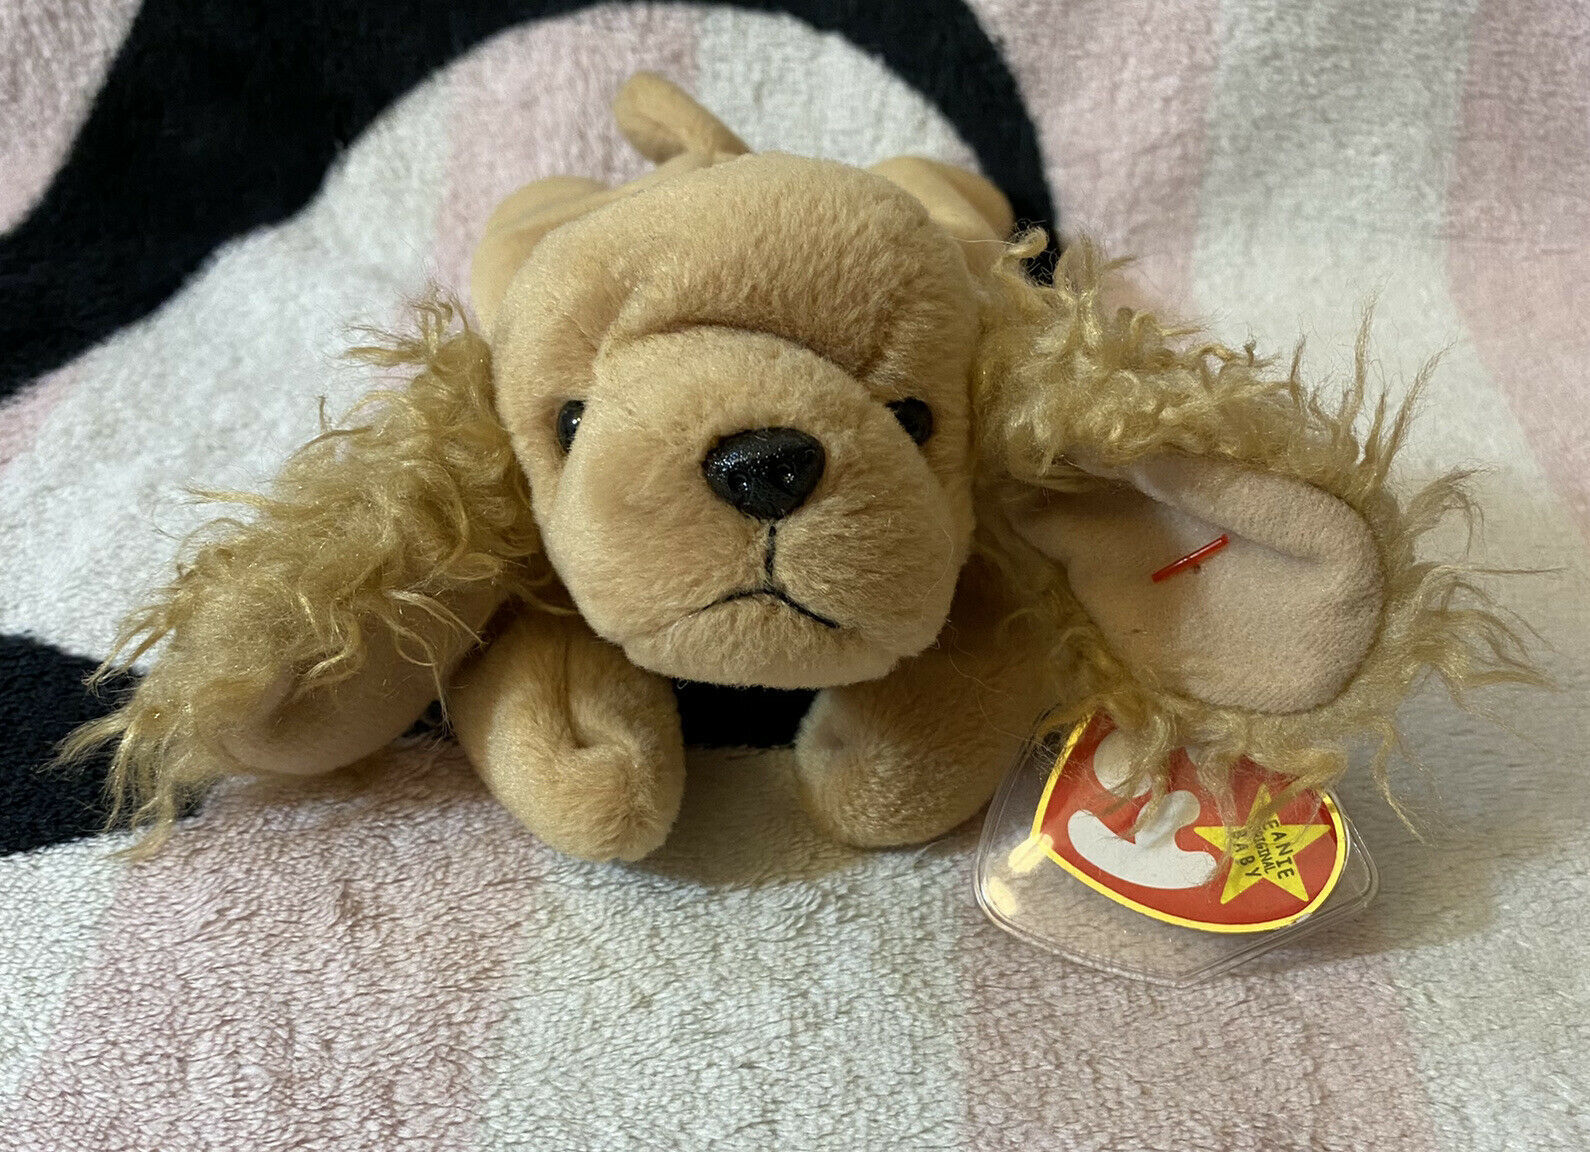 Ty Beanie Baby Rescue Plush 6in Dalmatian Dog Stuffed Animal Retired Tag 2011 for sale online 